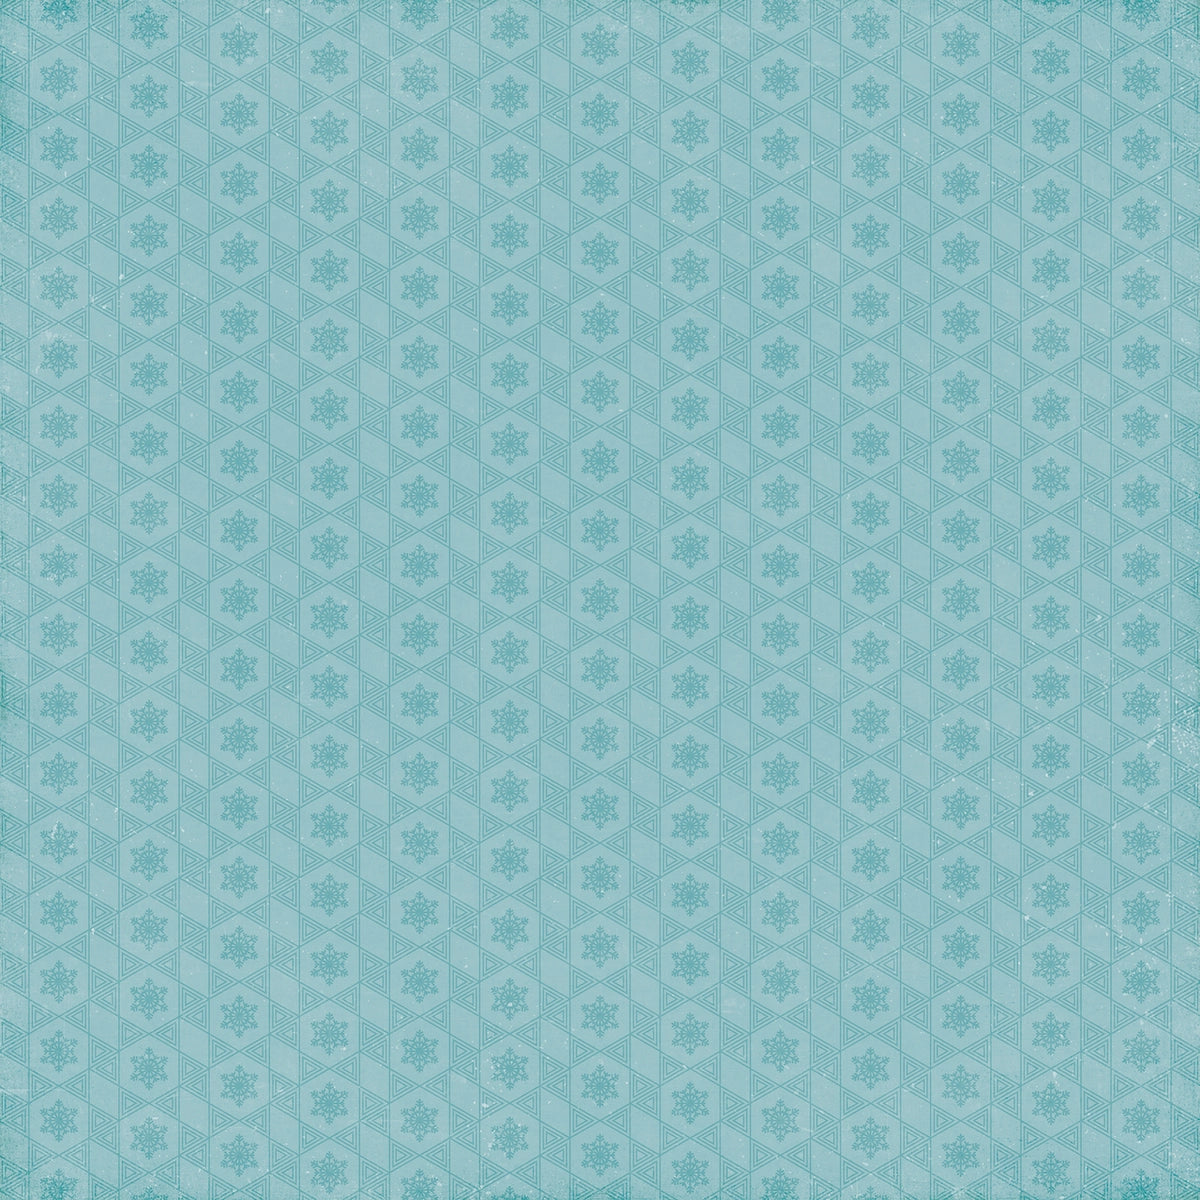 Side B - snowflakes in an abstract pattern on turquoise background